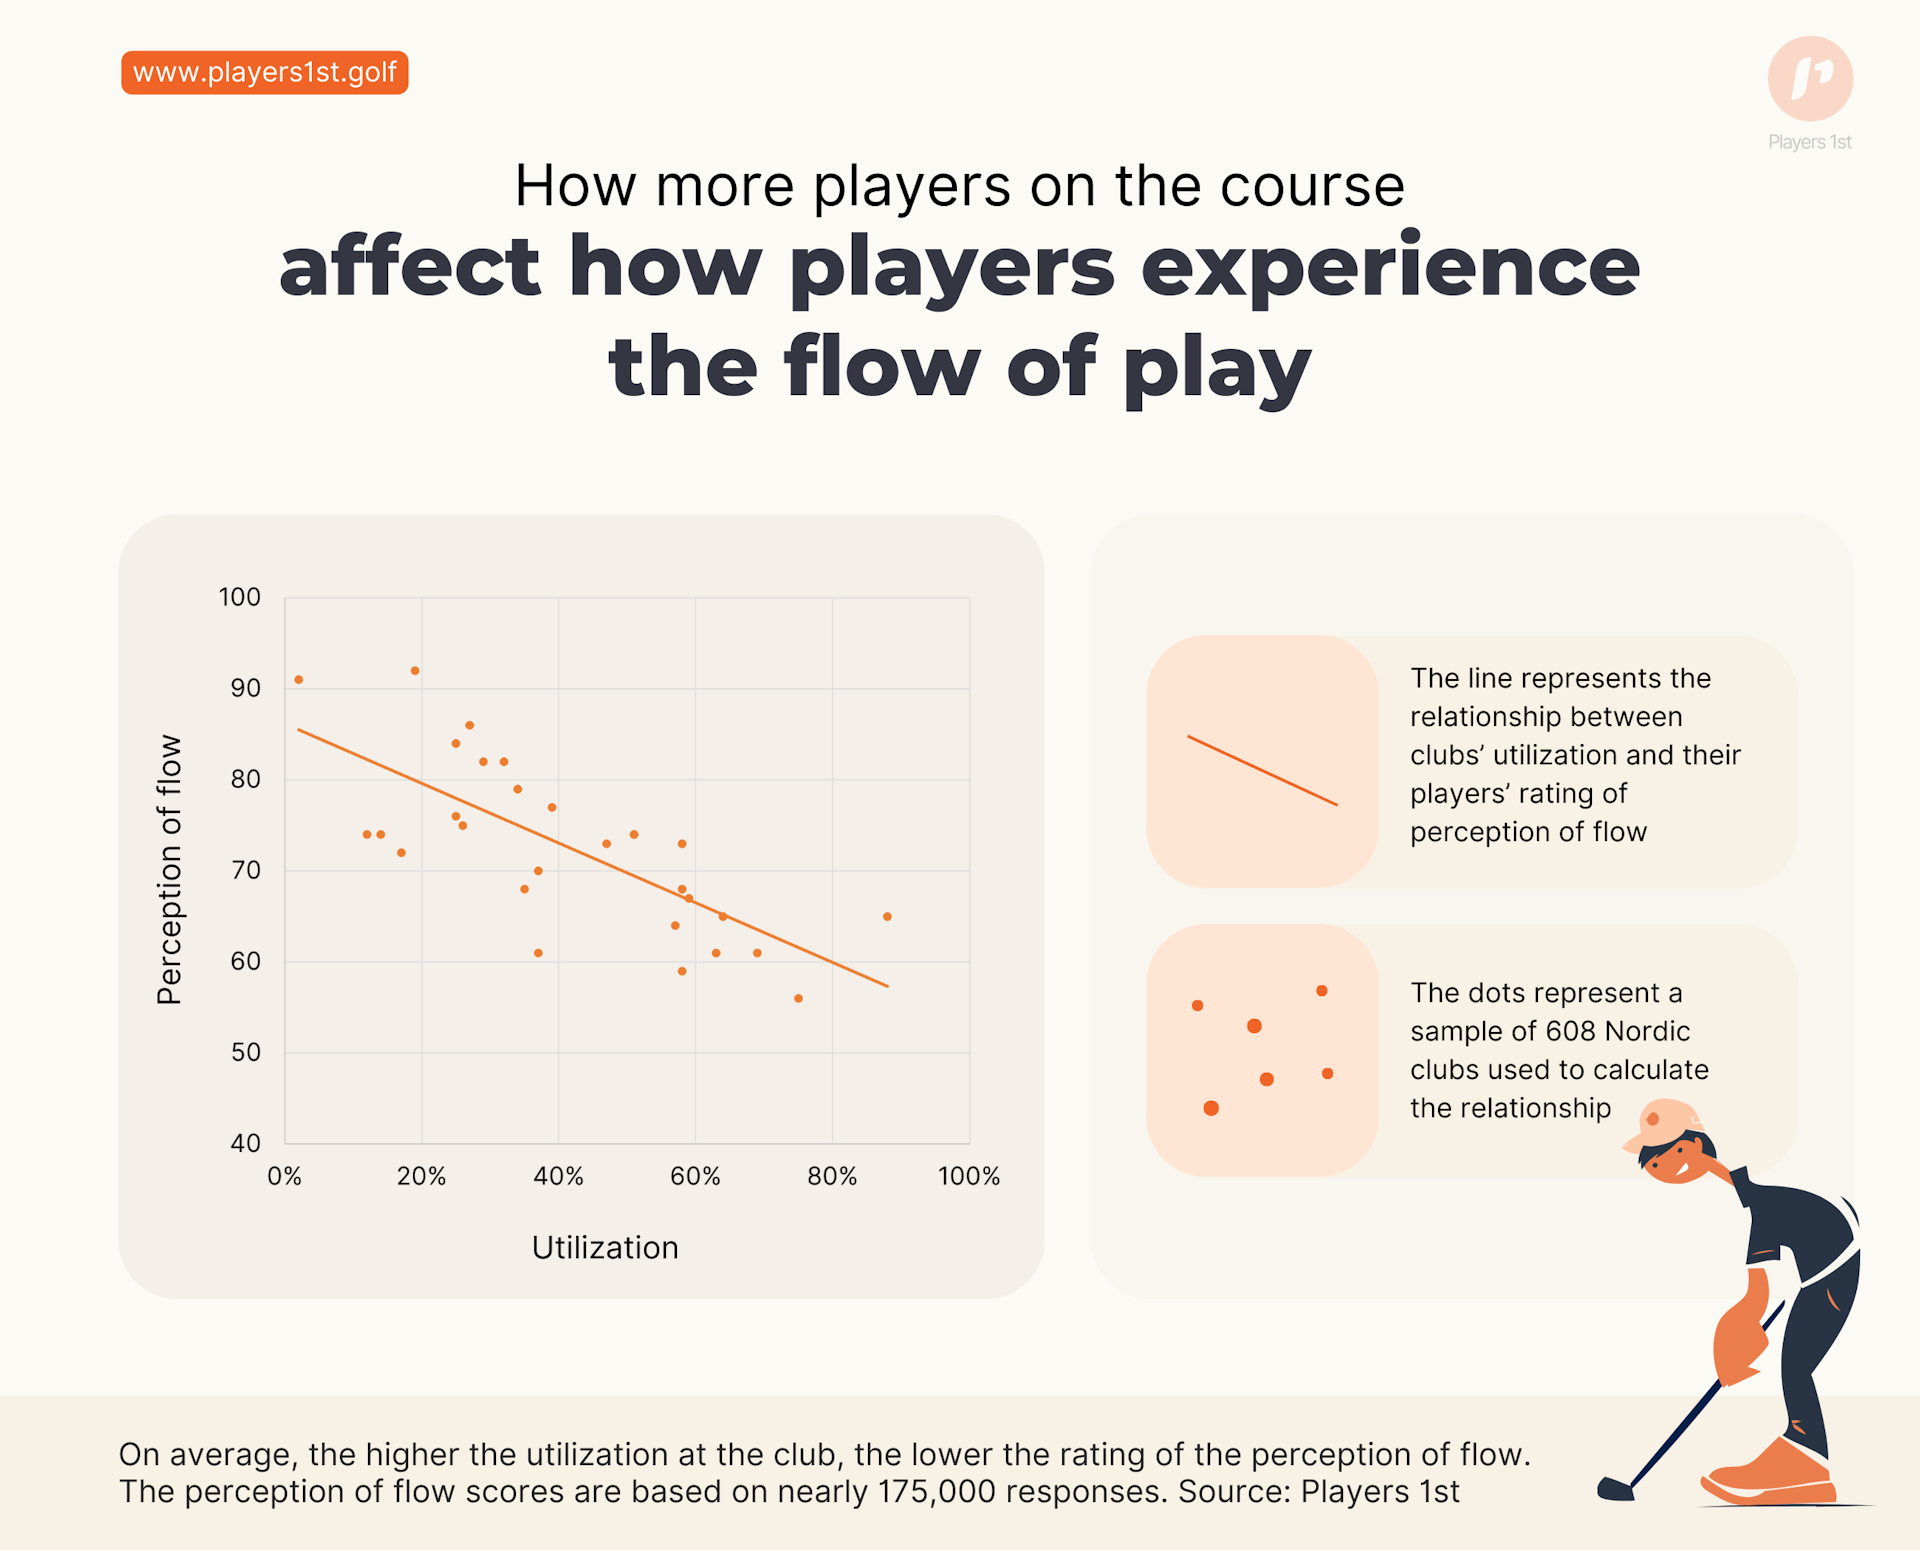 Figure 1: The relation between clubs' utilization rates and the golfers' perception of flow. The results are based on 608 clubs across Norway, Sweden, Finland, and Denmark. Source: Players 1st. 